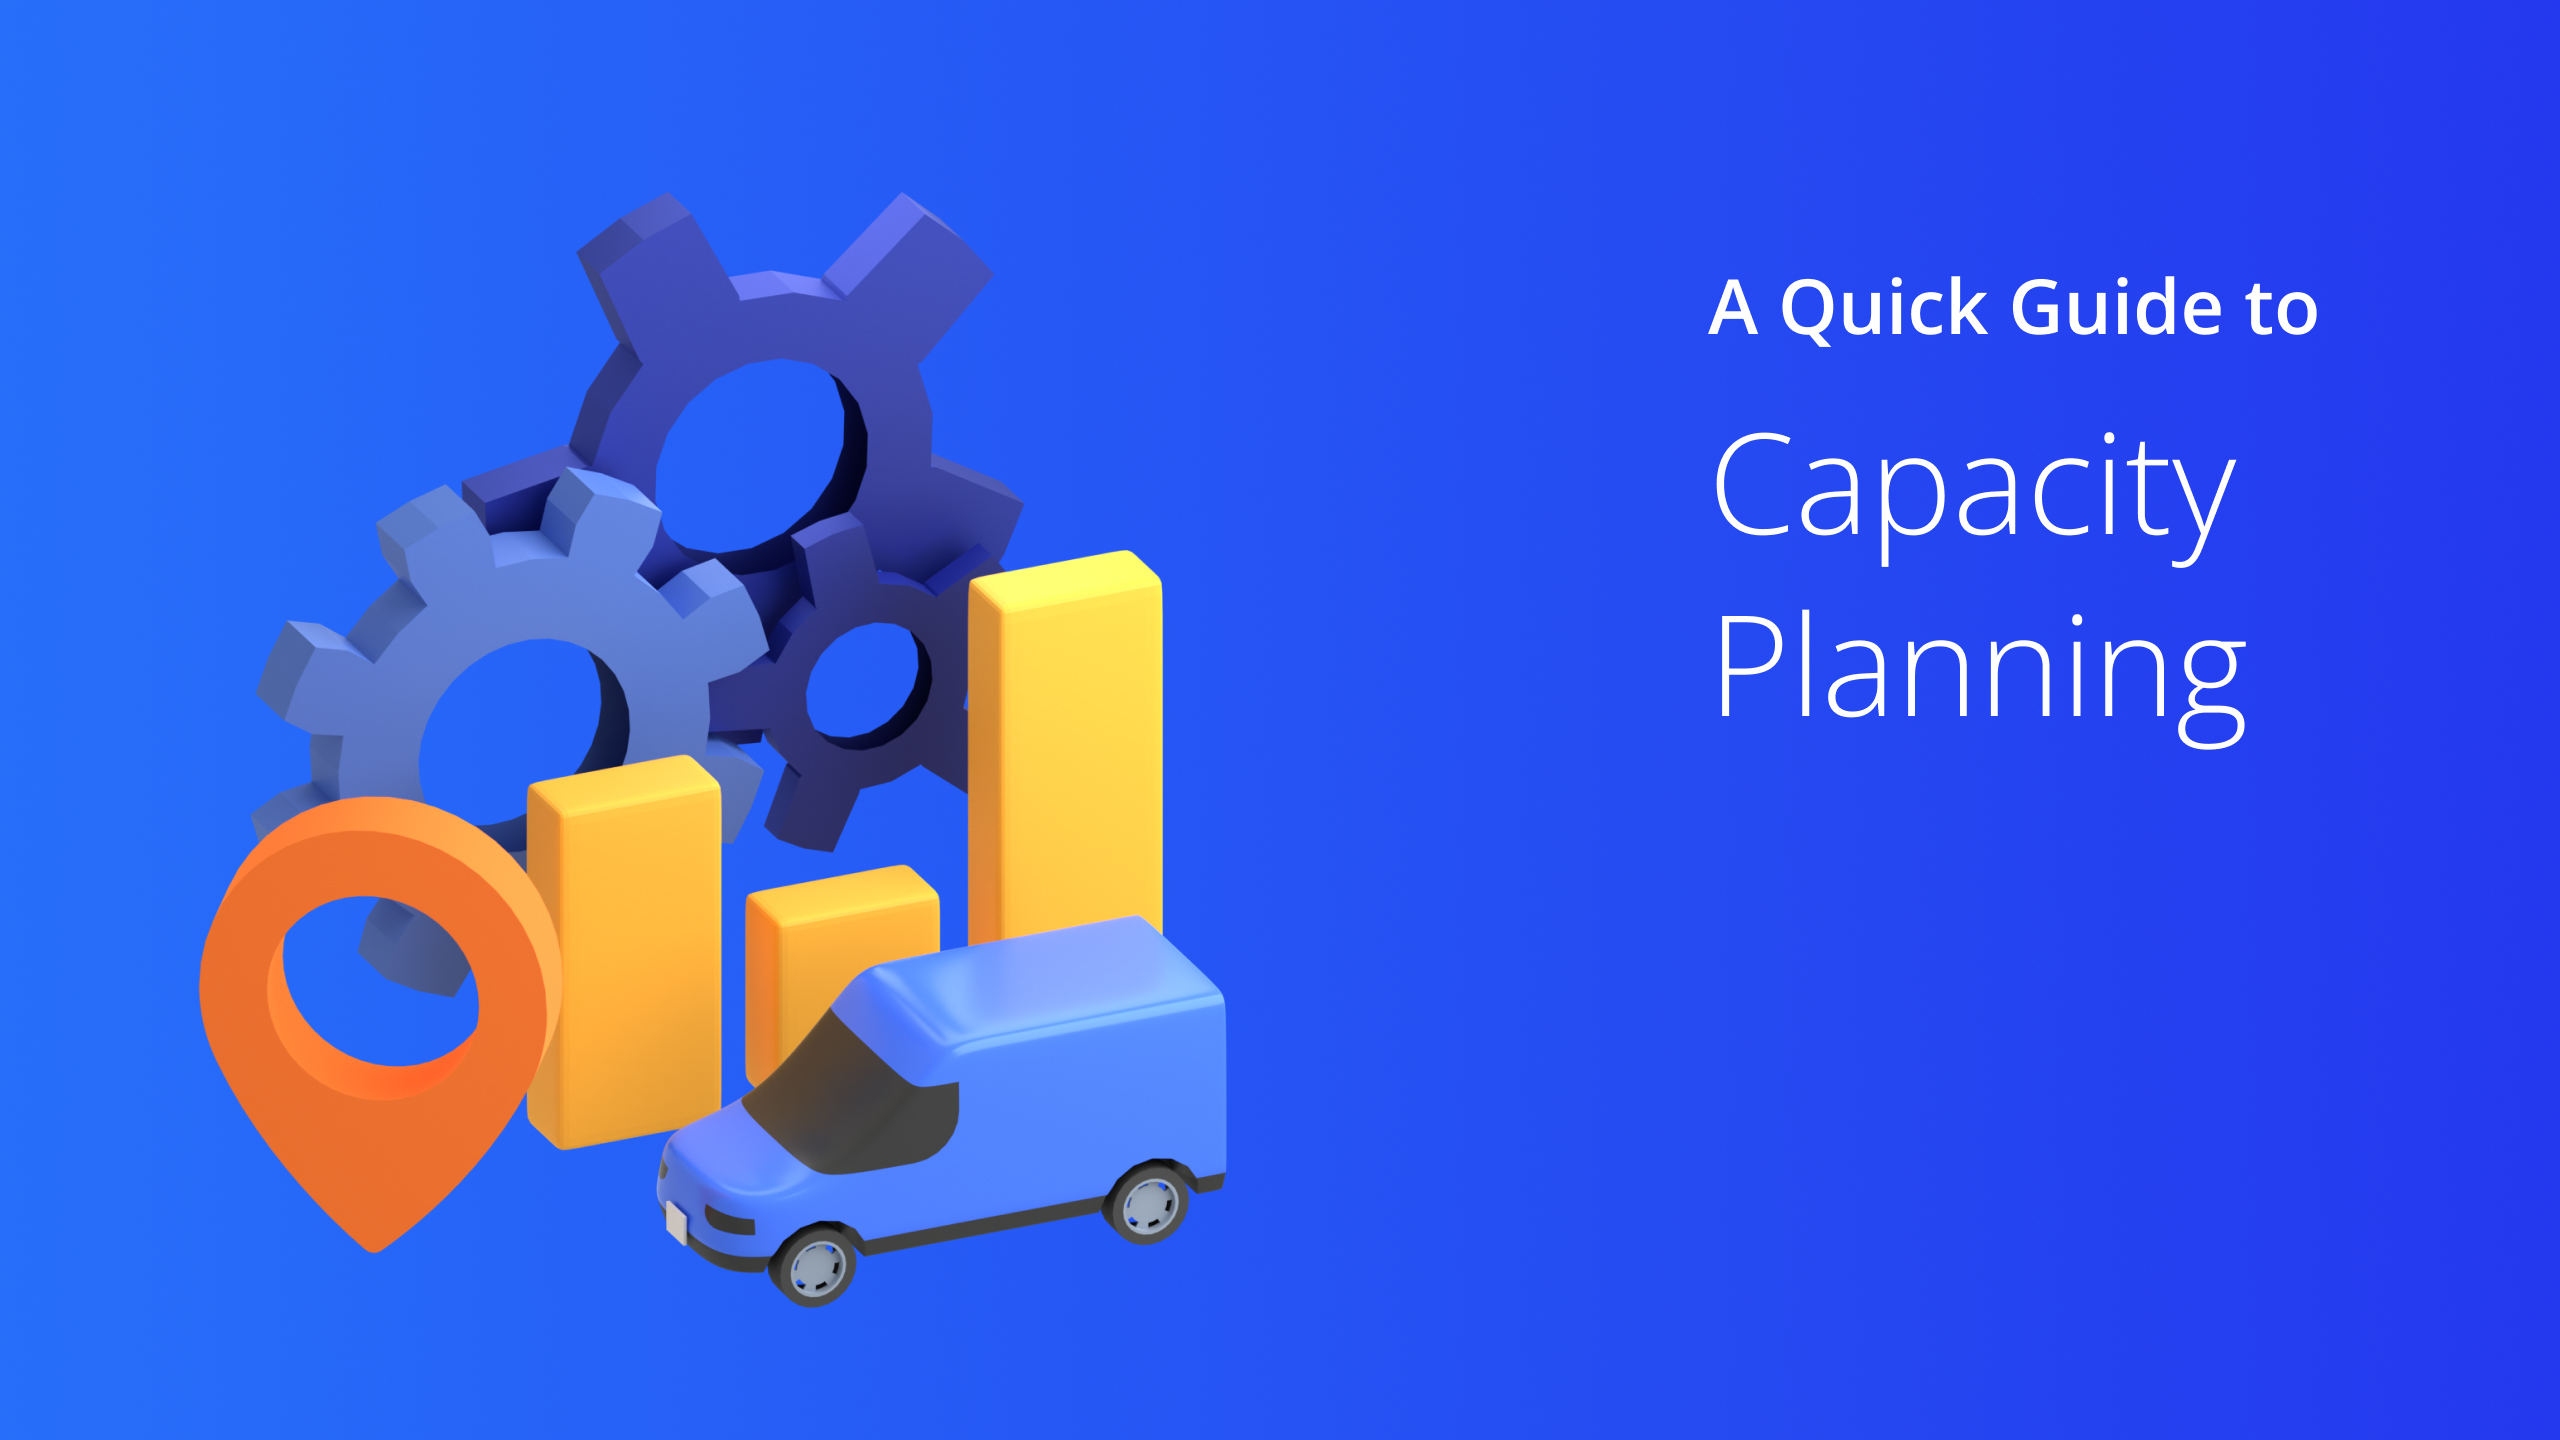 Custom Image - A Quick Guide to Capacity Planning